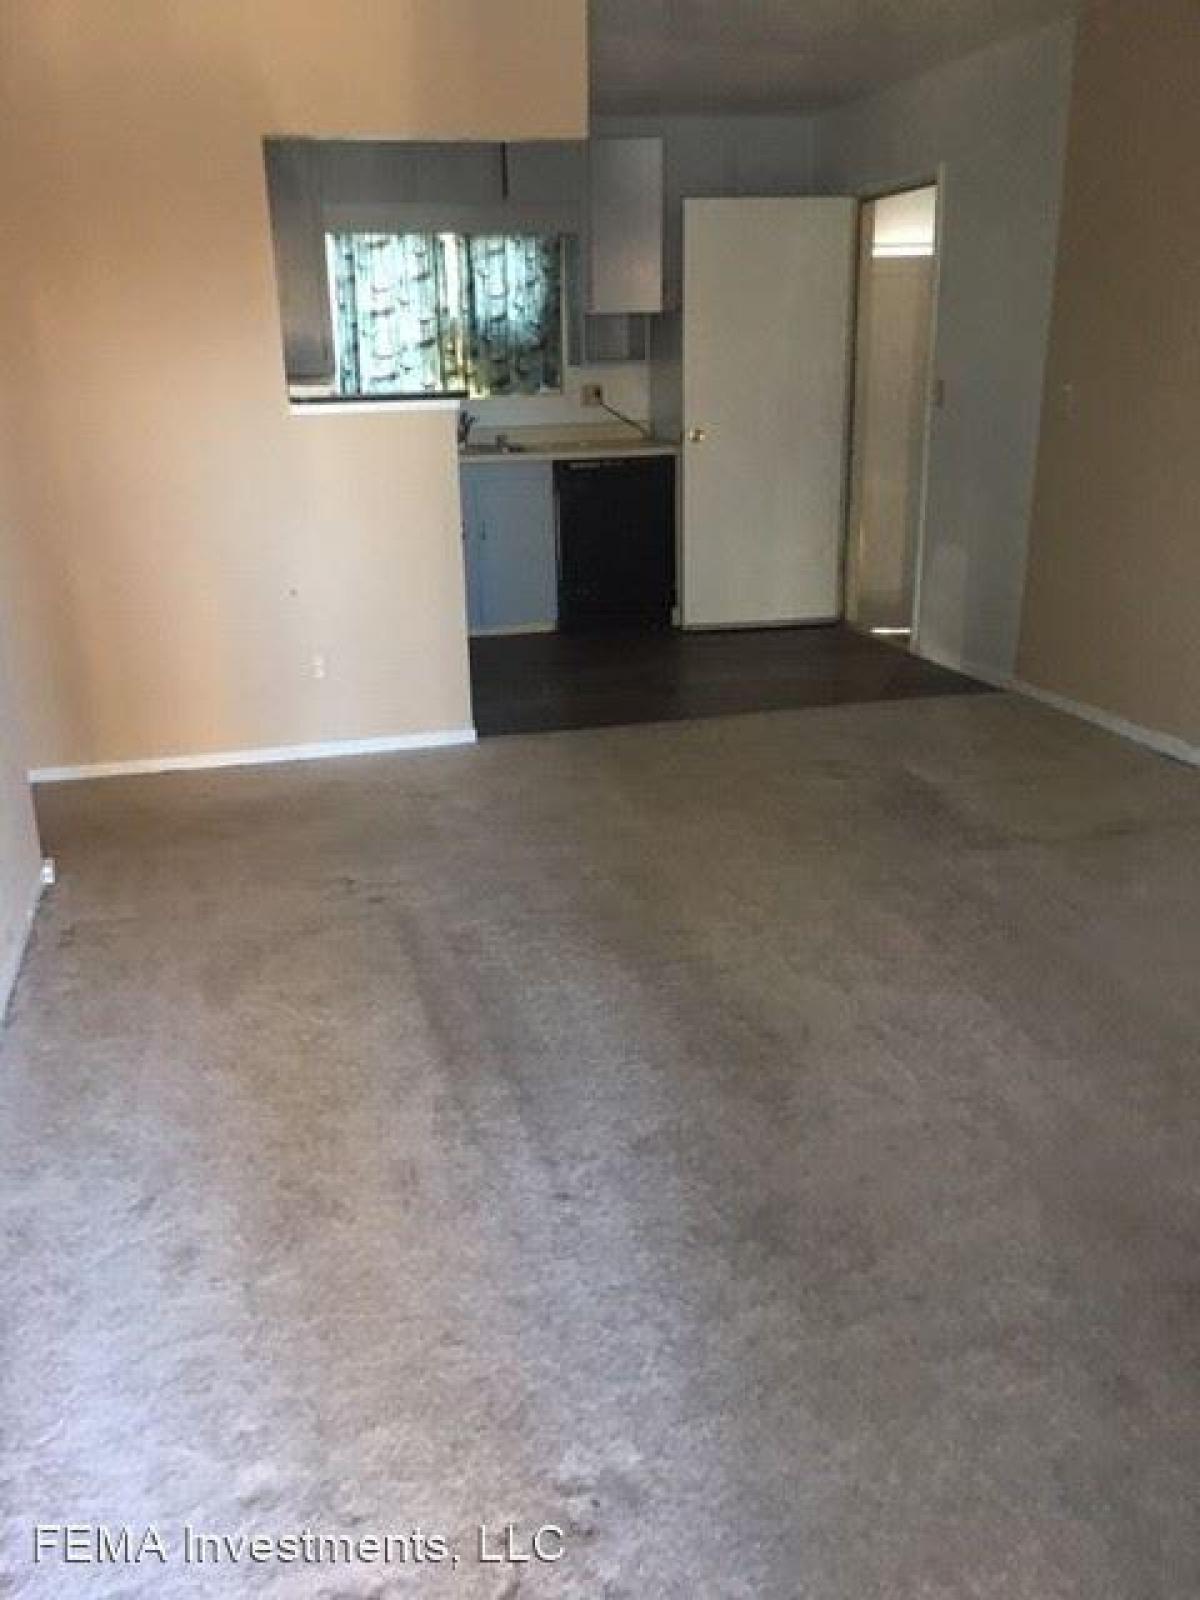 Picture of Apartment For Rent in Martinez, California, United States